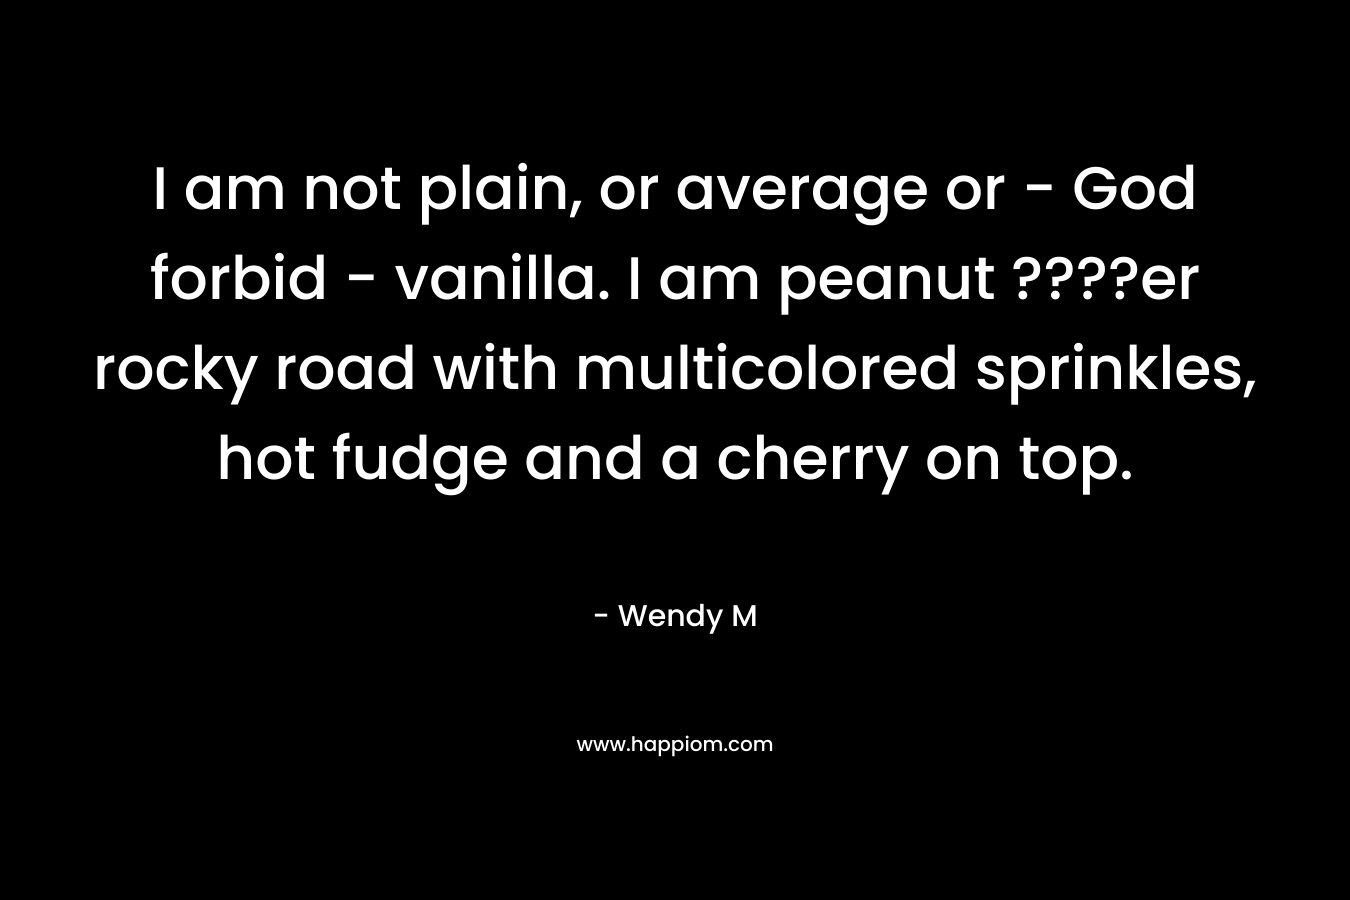 I am not plain, or average or – God forbid – vanilla. I am peanut ????er rocky road with multicolored sprinkles, hot fudge and a cherry on top. – Wendy M